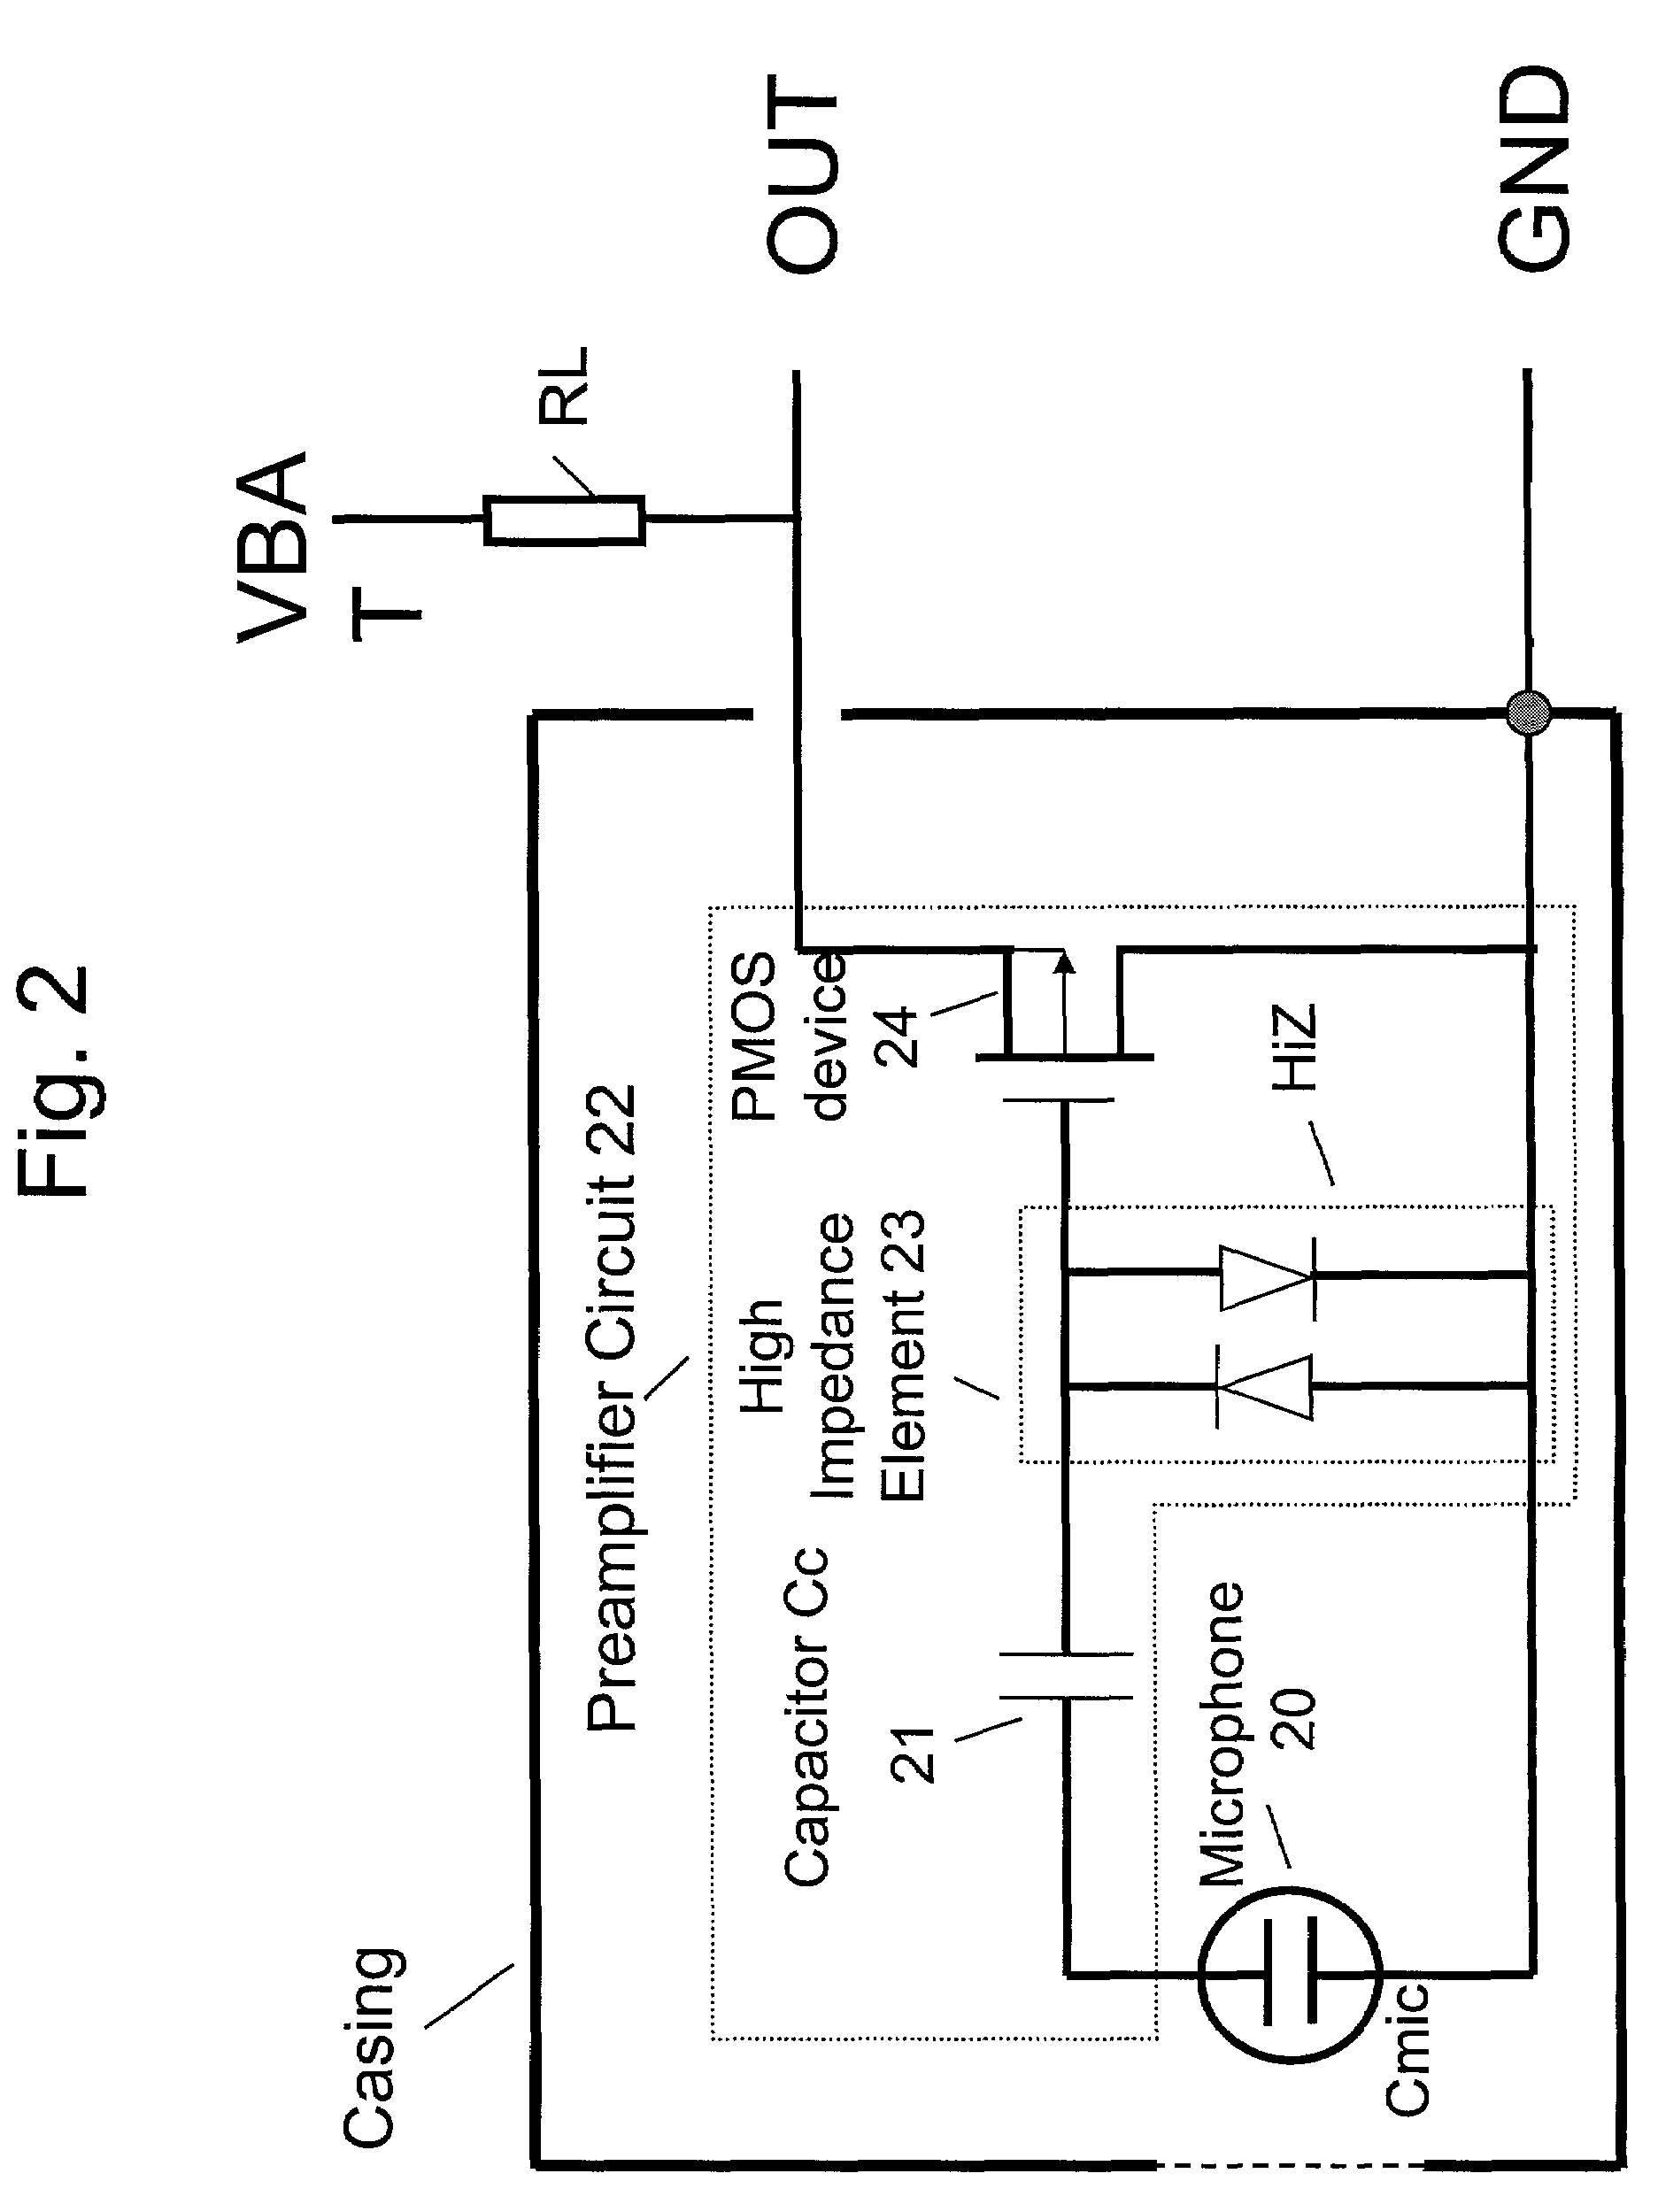 Electret condensor microphone preamplifier that is insensitive to leakage currents at the input